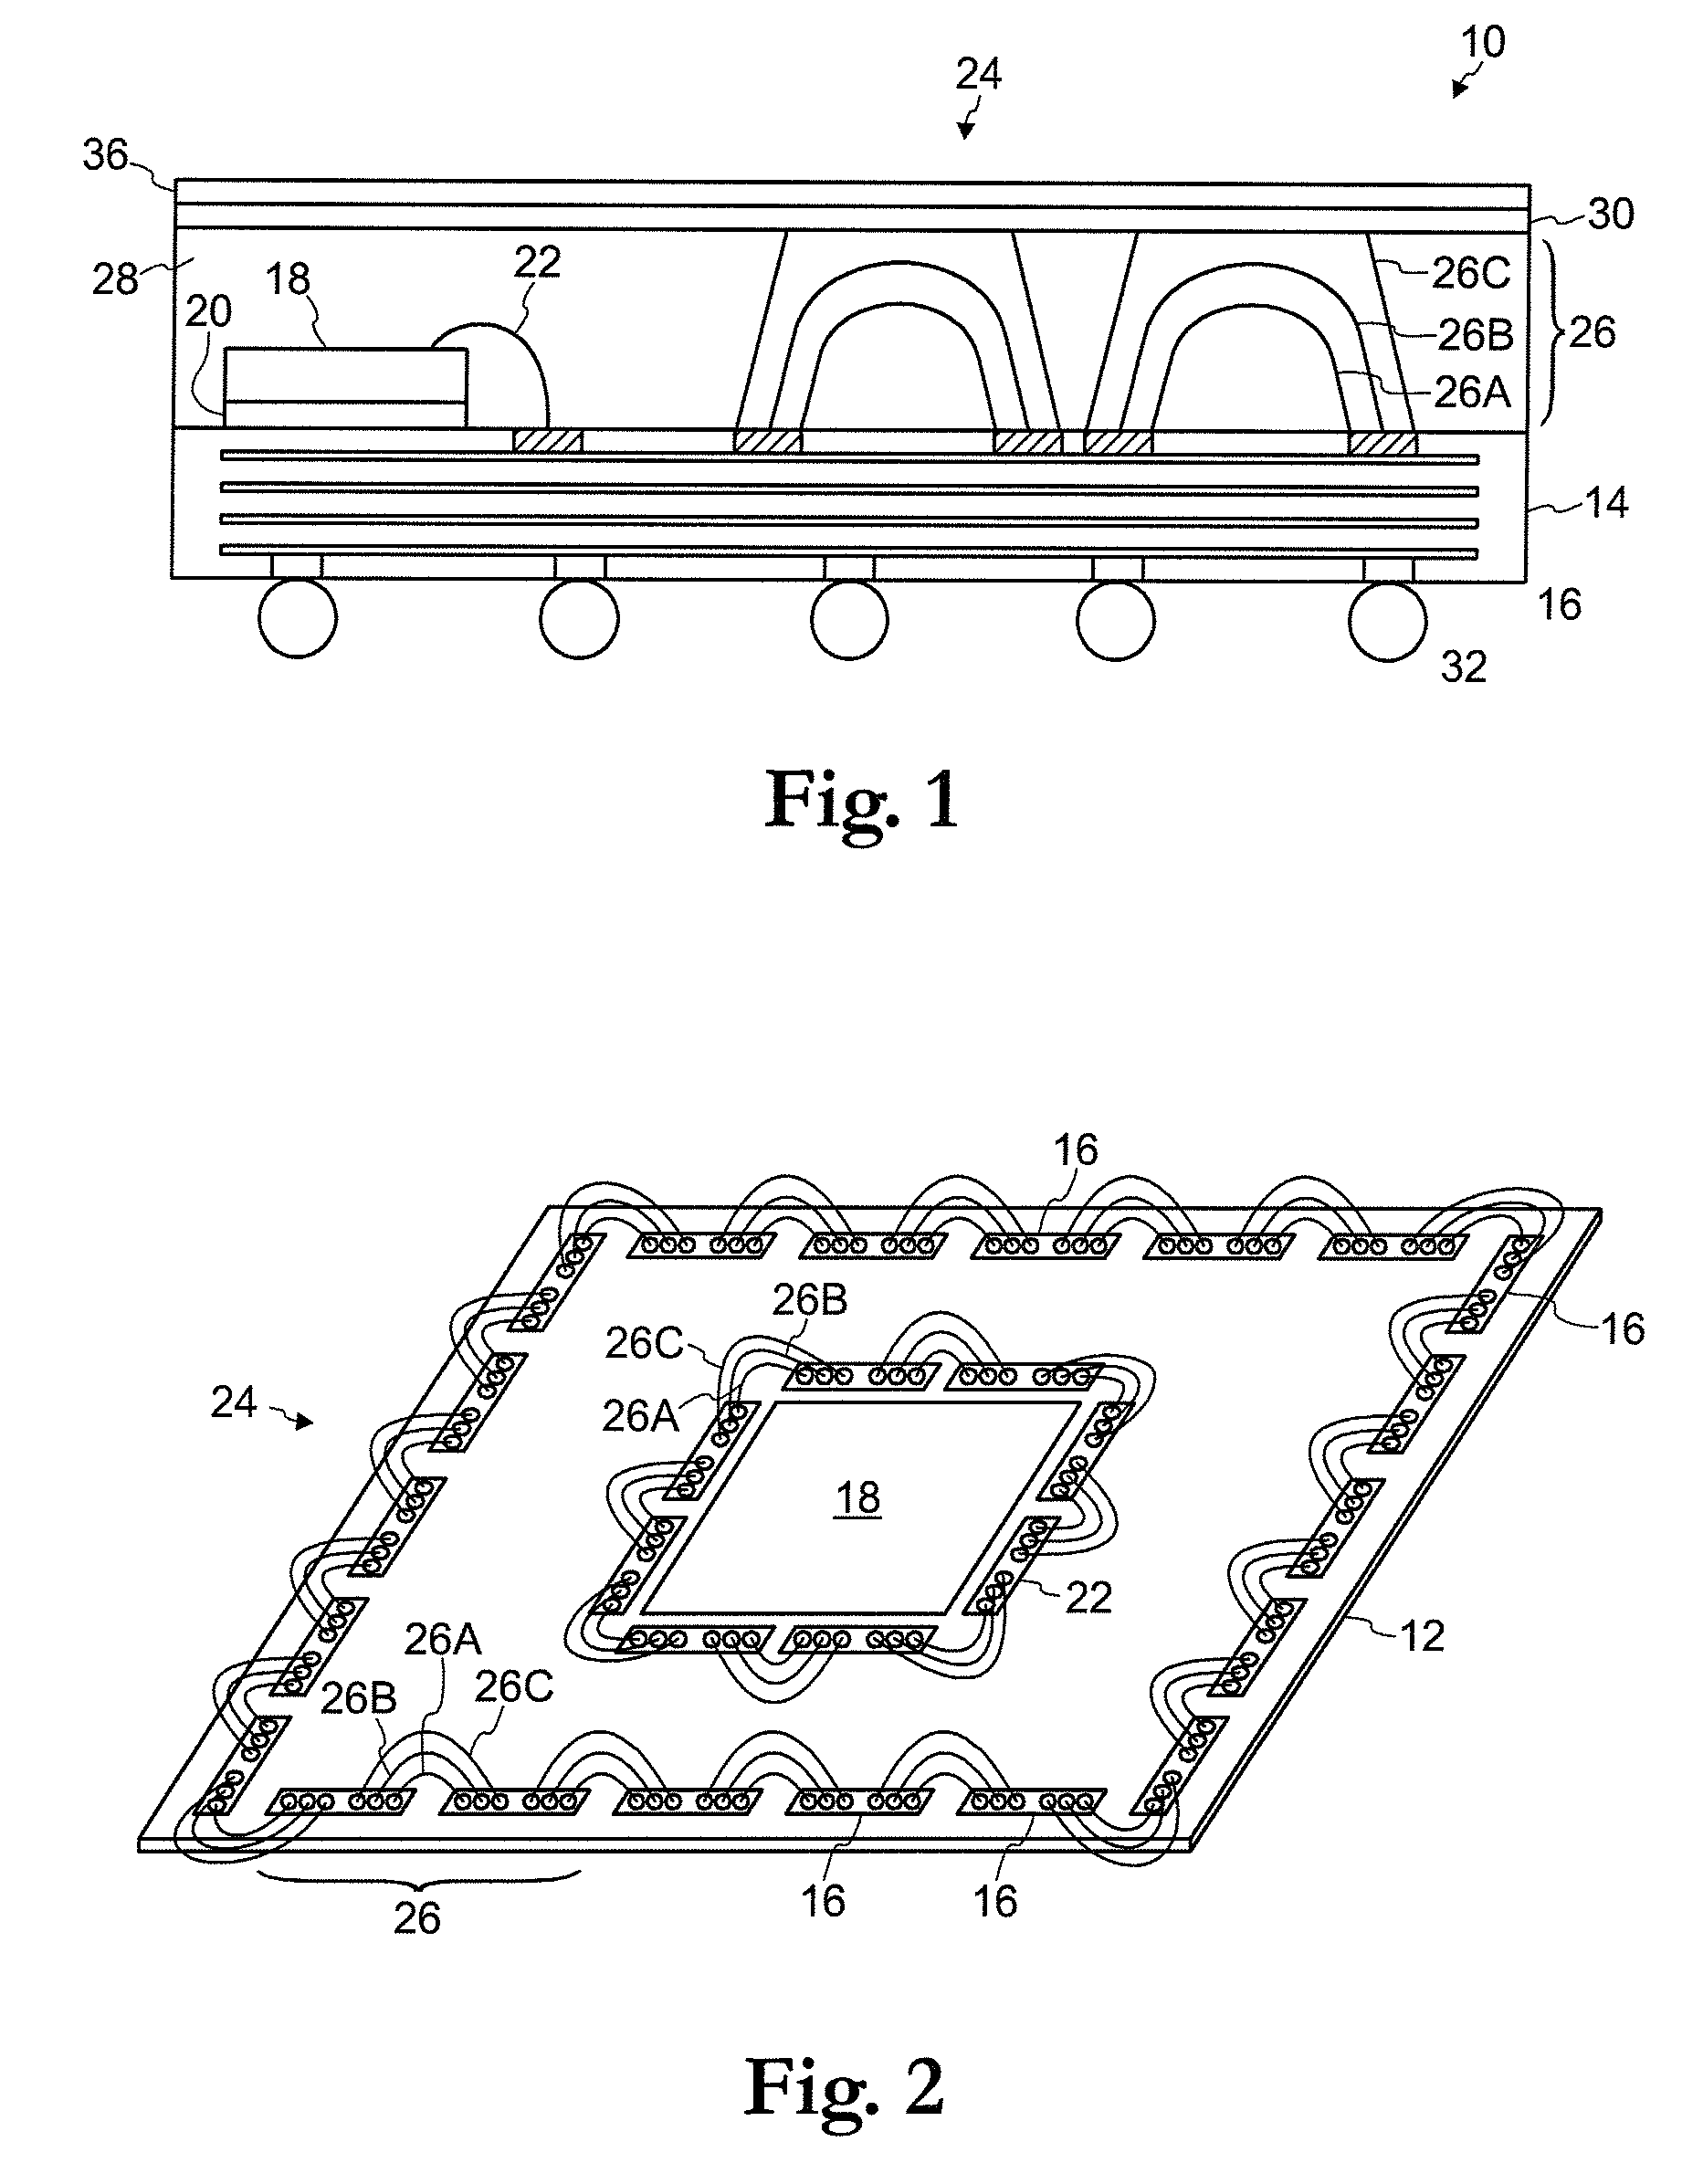 Semiconductor device having EMI shielding and method therefor